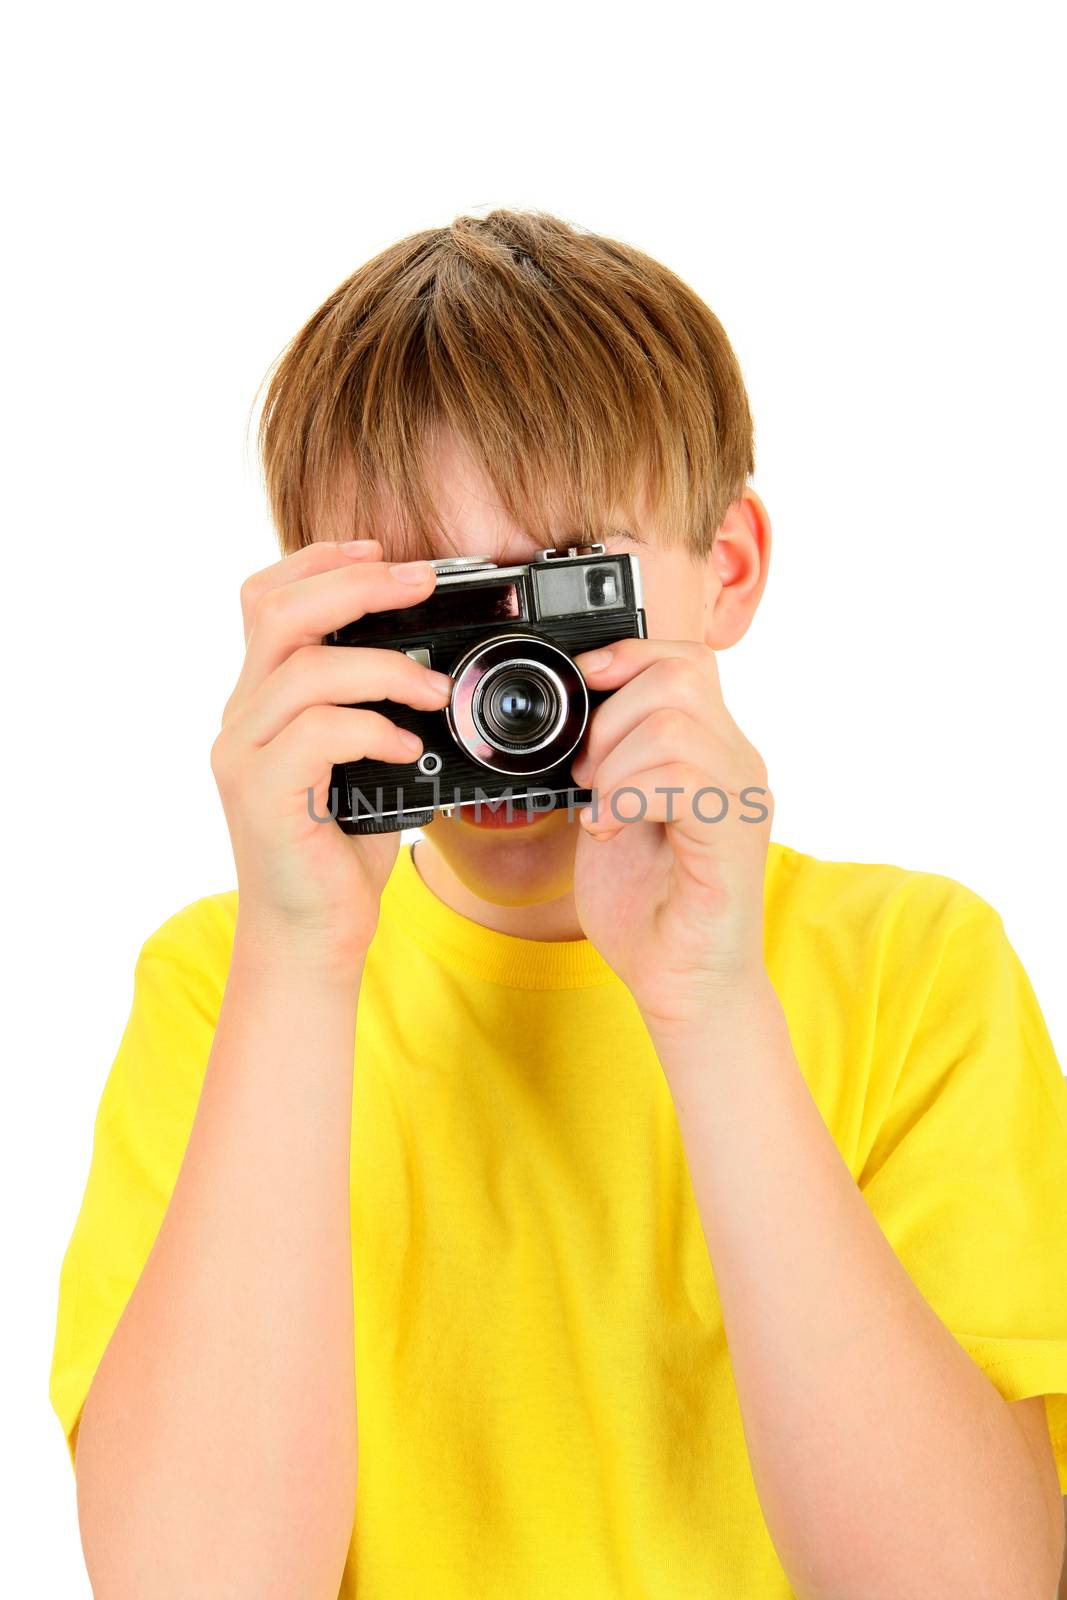 Kid with Vintage Photo Camera Isolated on the White Background